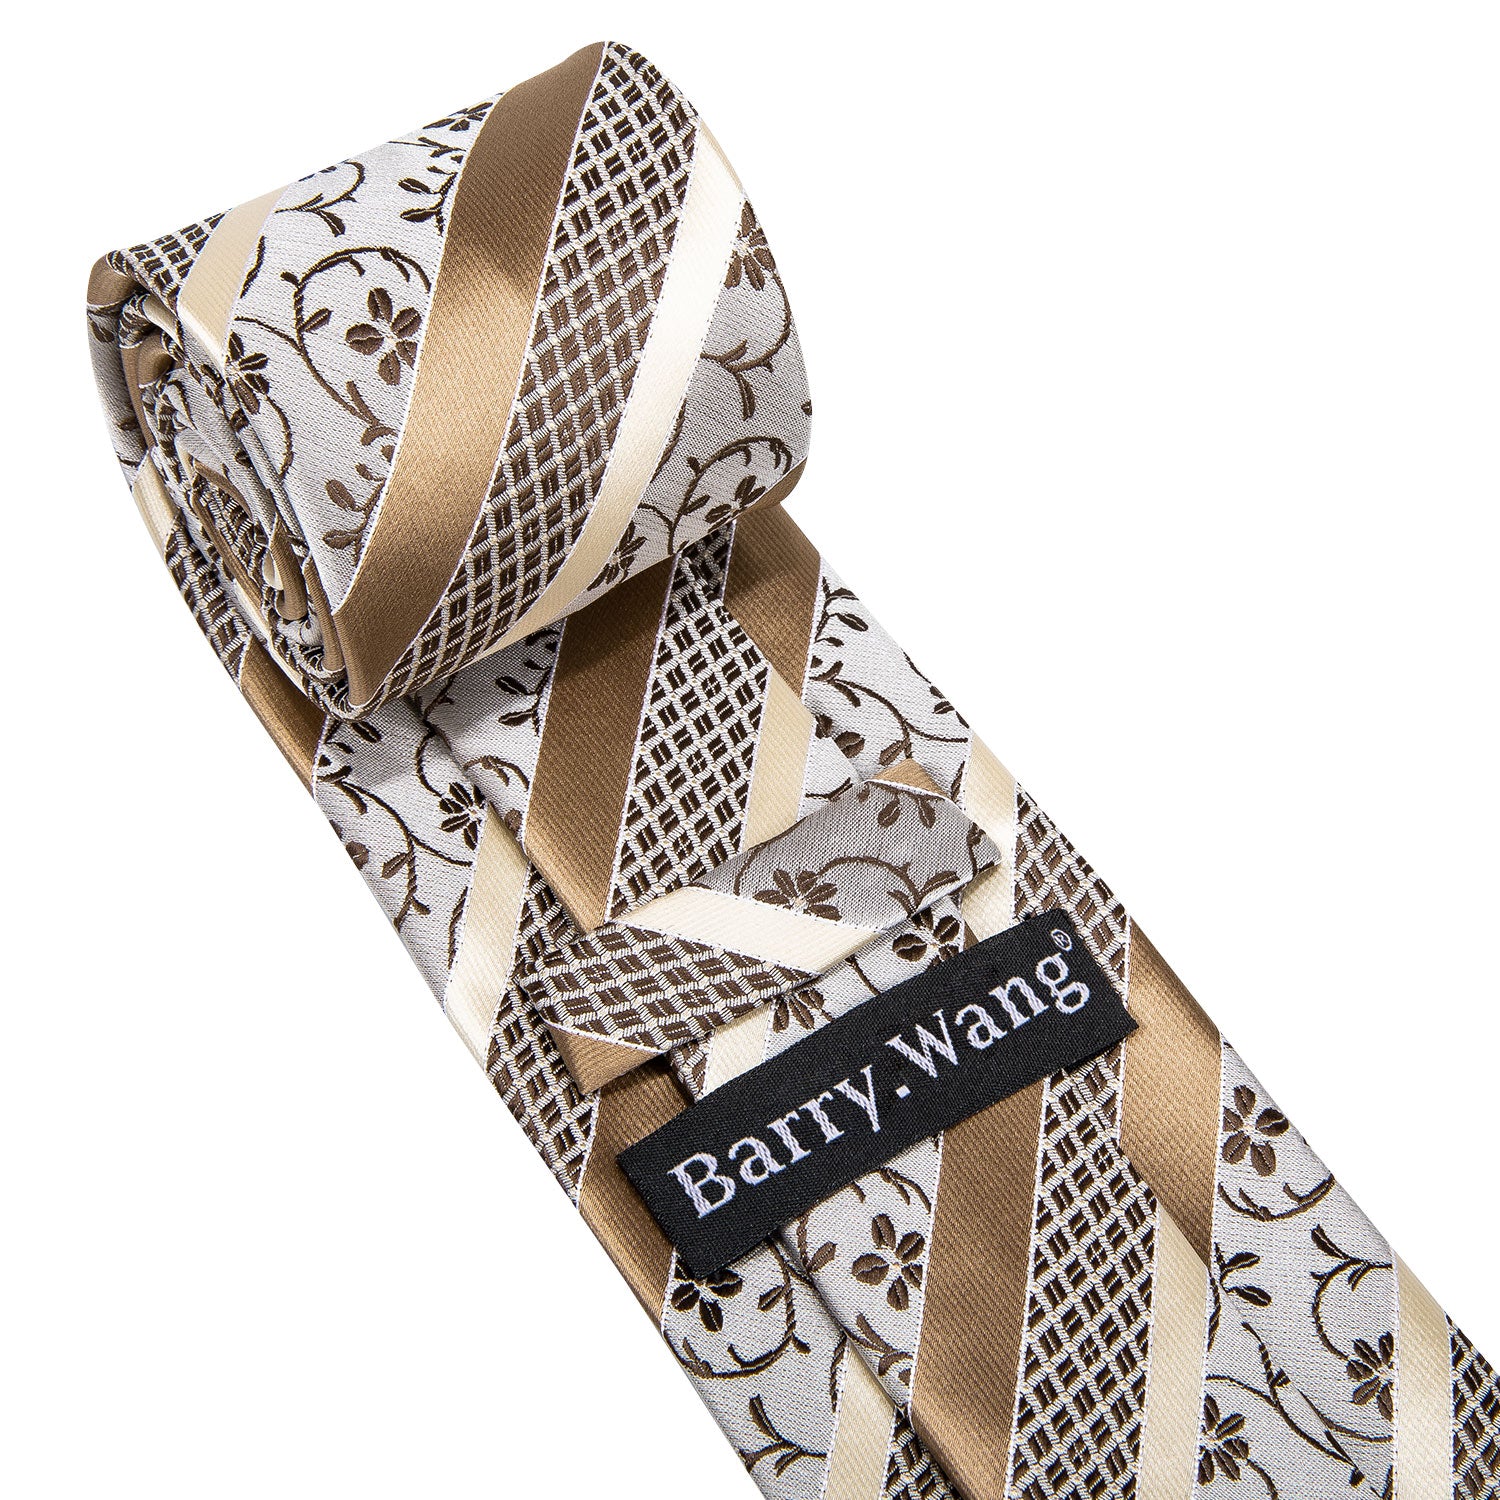 Barry.wang Floral Tie Silk Champagne White Striped Tie Pocket Square Cufflinks Set